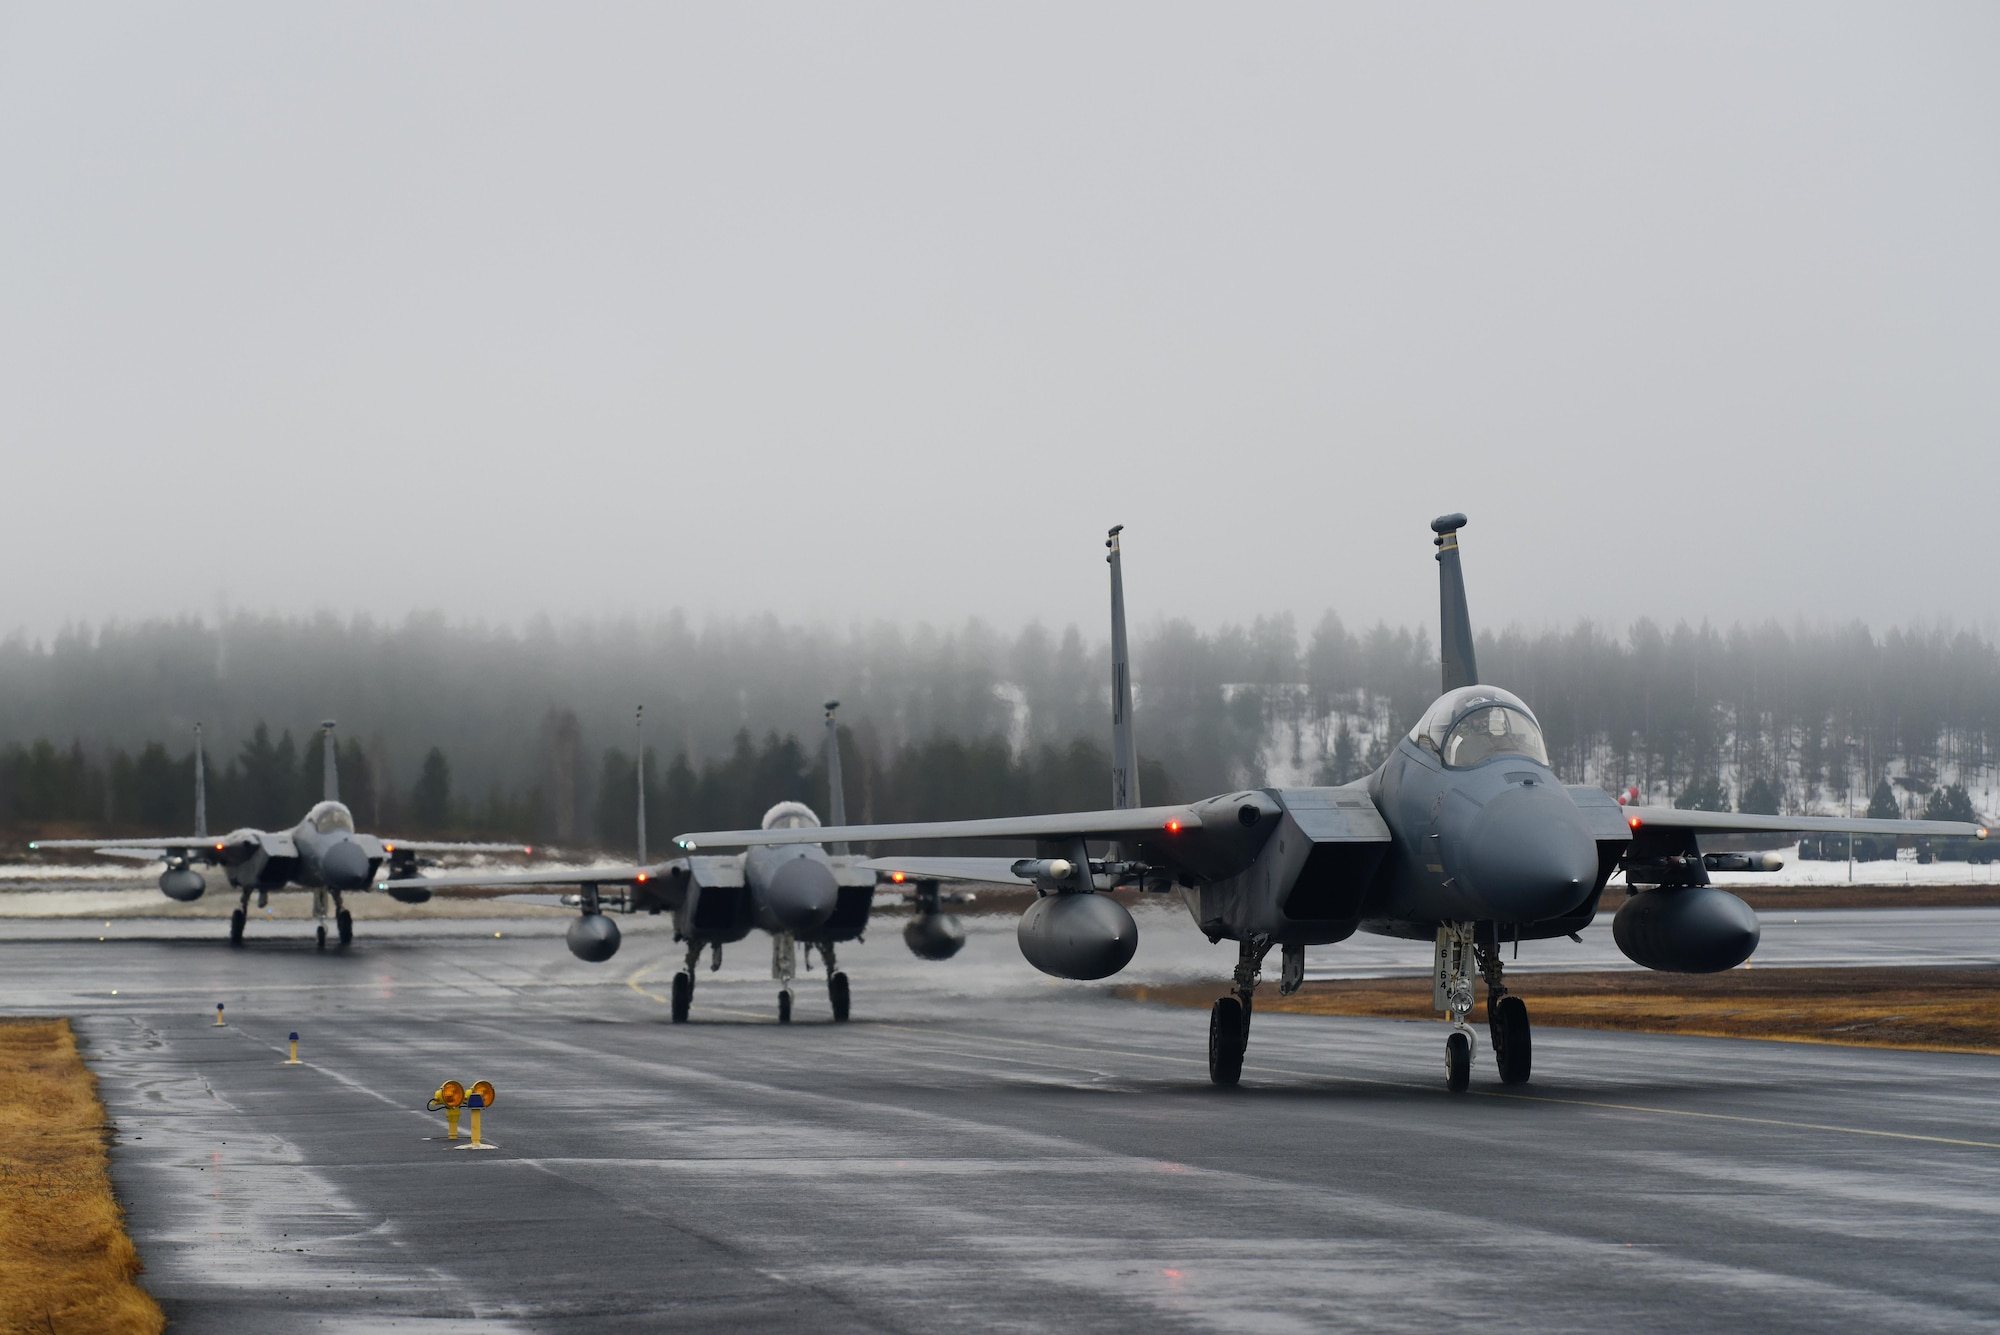 Three F-15C Eagles from Royal Air Force Lakenheath, England, taxi after landing at Rovaniemi Air Base, Finland, May 17, in support of Arctic Challenge 2017. The Reapers joined counterparts from 10 other nations, along with representatives from NATO, for the exercise to build on their expertise in the air and increase interoperability. (U.S. Air Force photo/Airman 1st Class Abby L. Finkel)